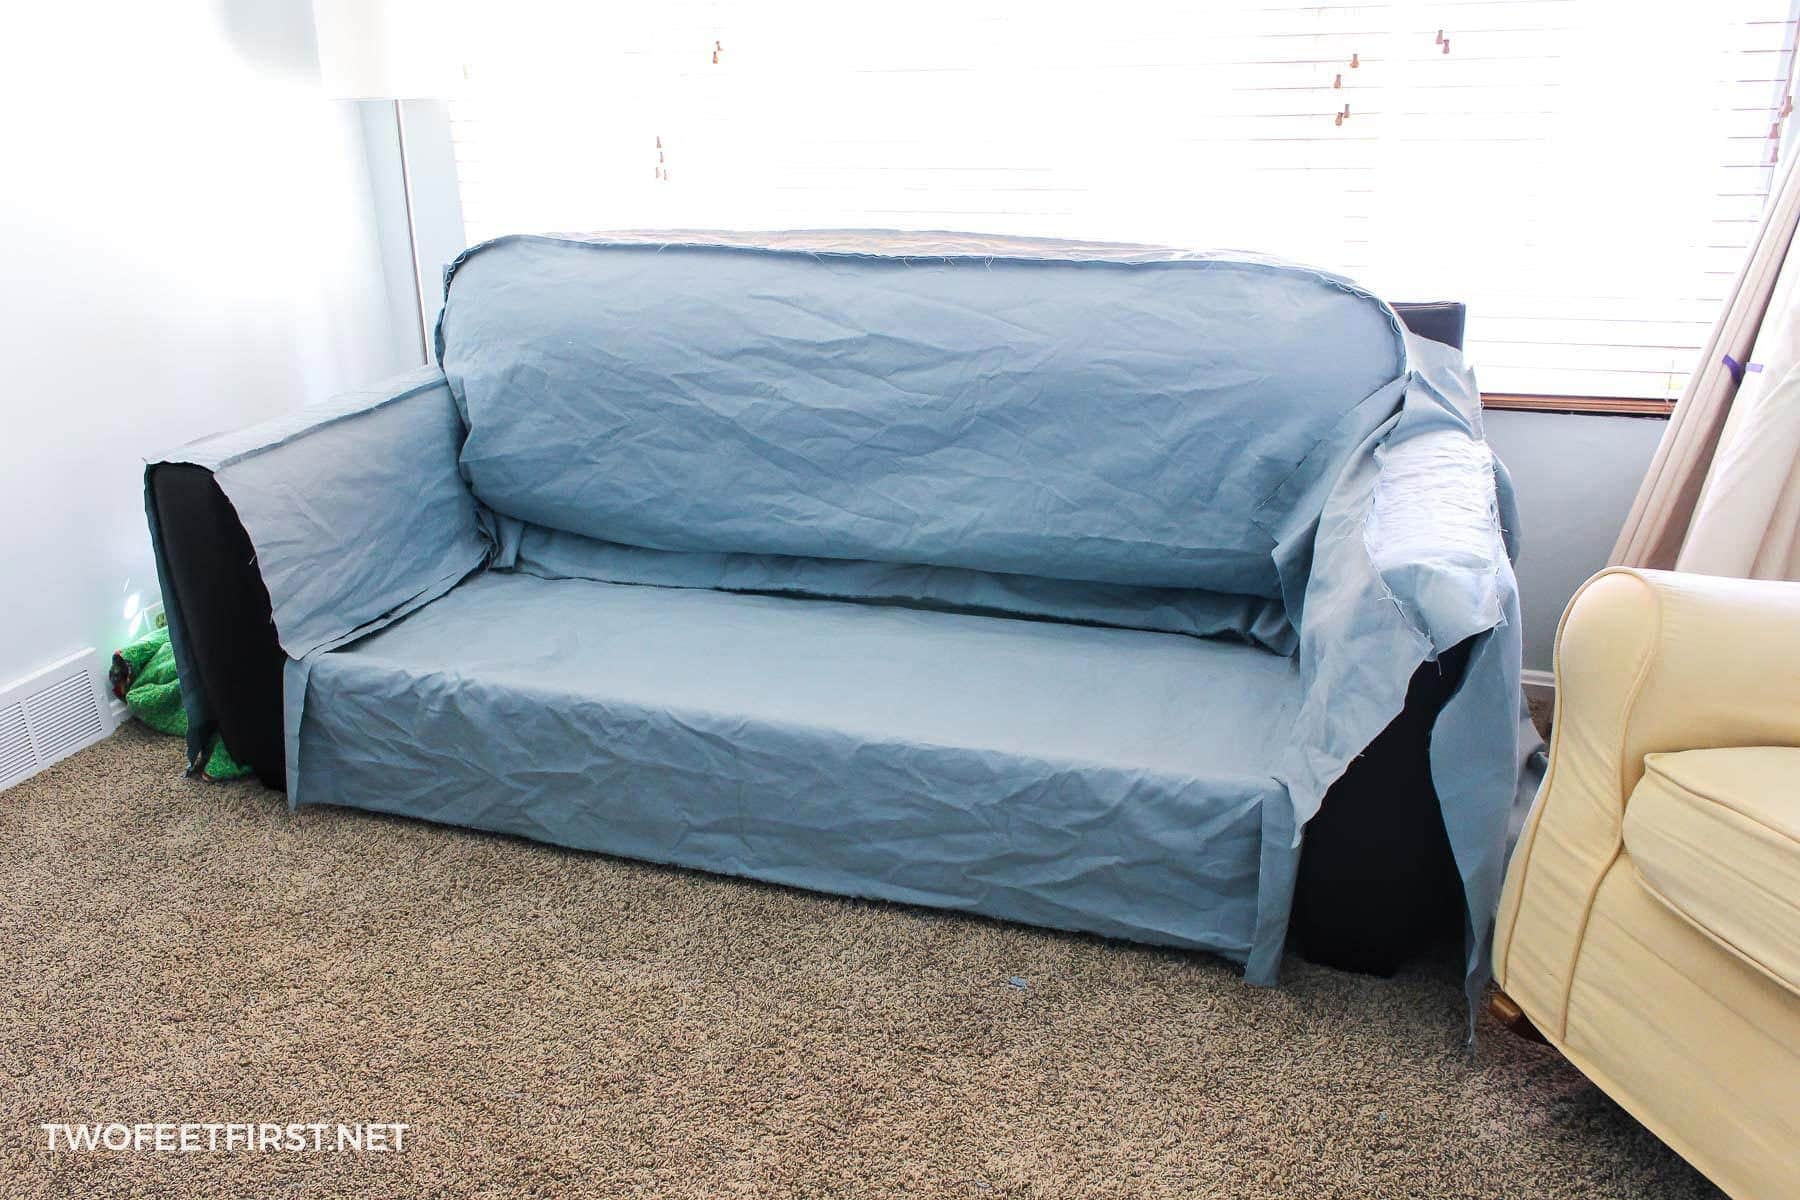 Make Slipcover For A Sofa Diy Couch Cover, Leather Couch Throw Covers